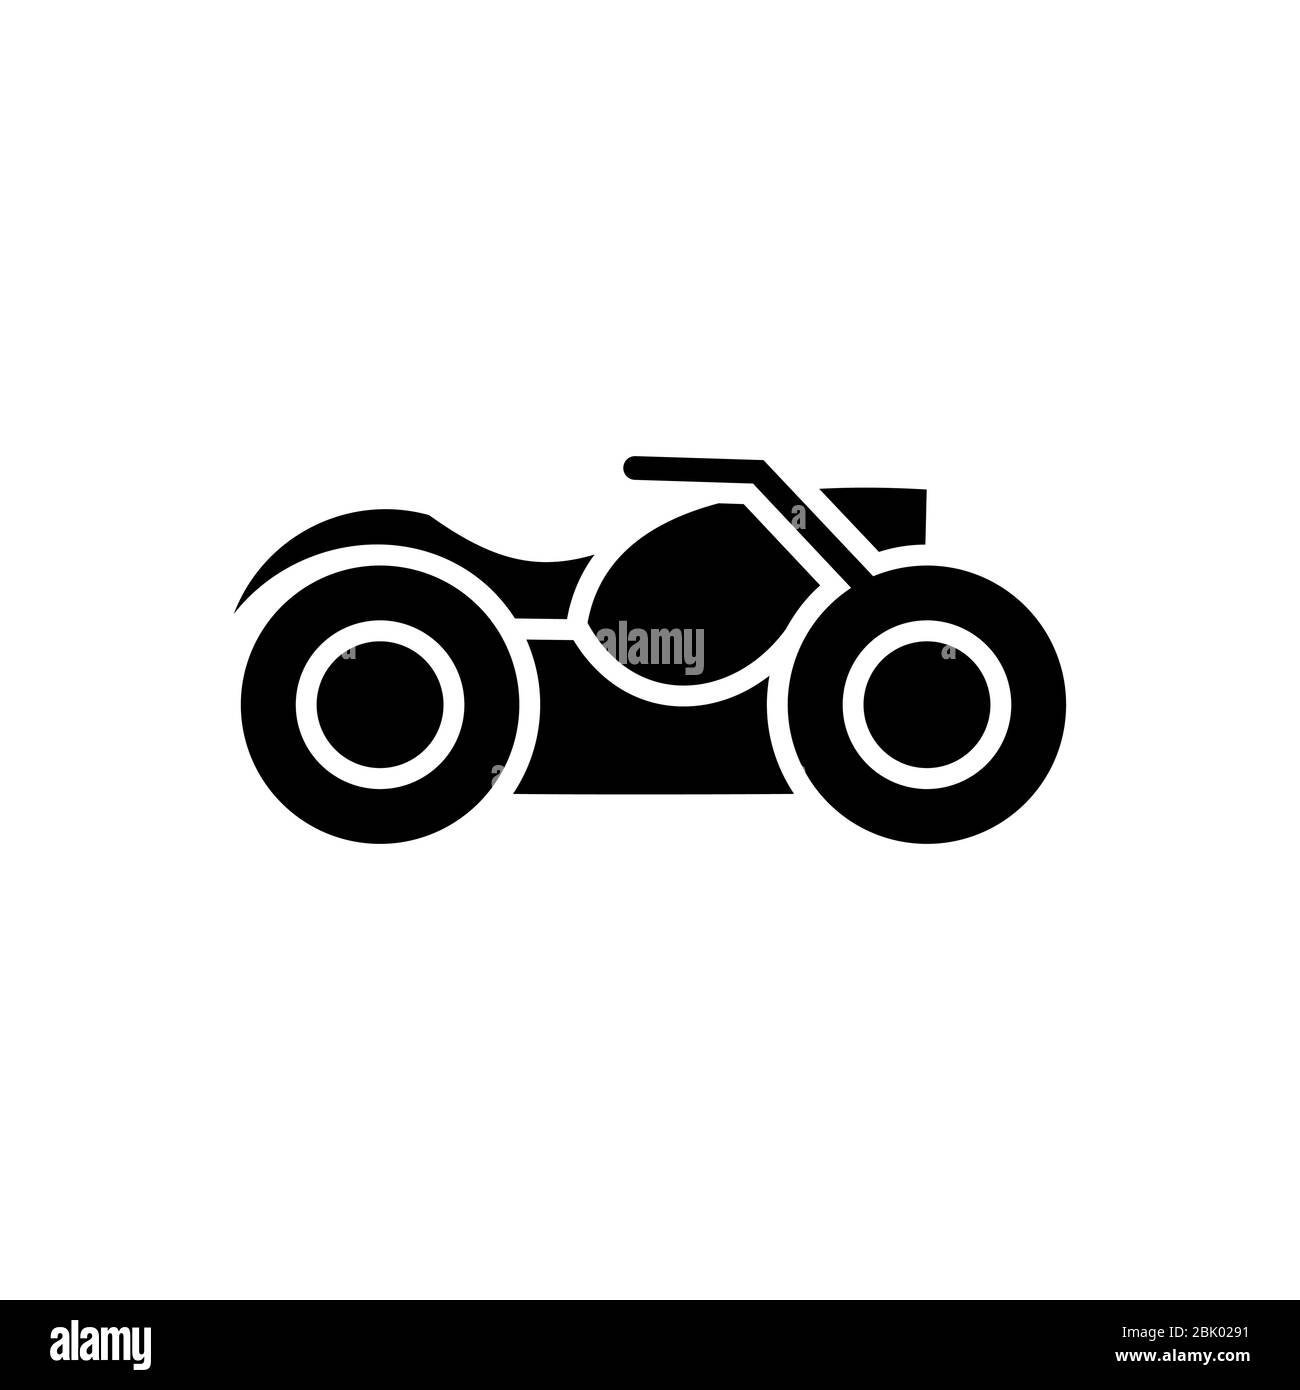 Vector of motorcycle design concept template, isolated on white background. Stock Vector